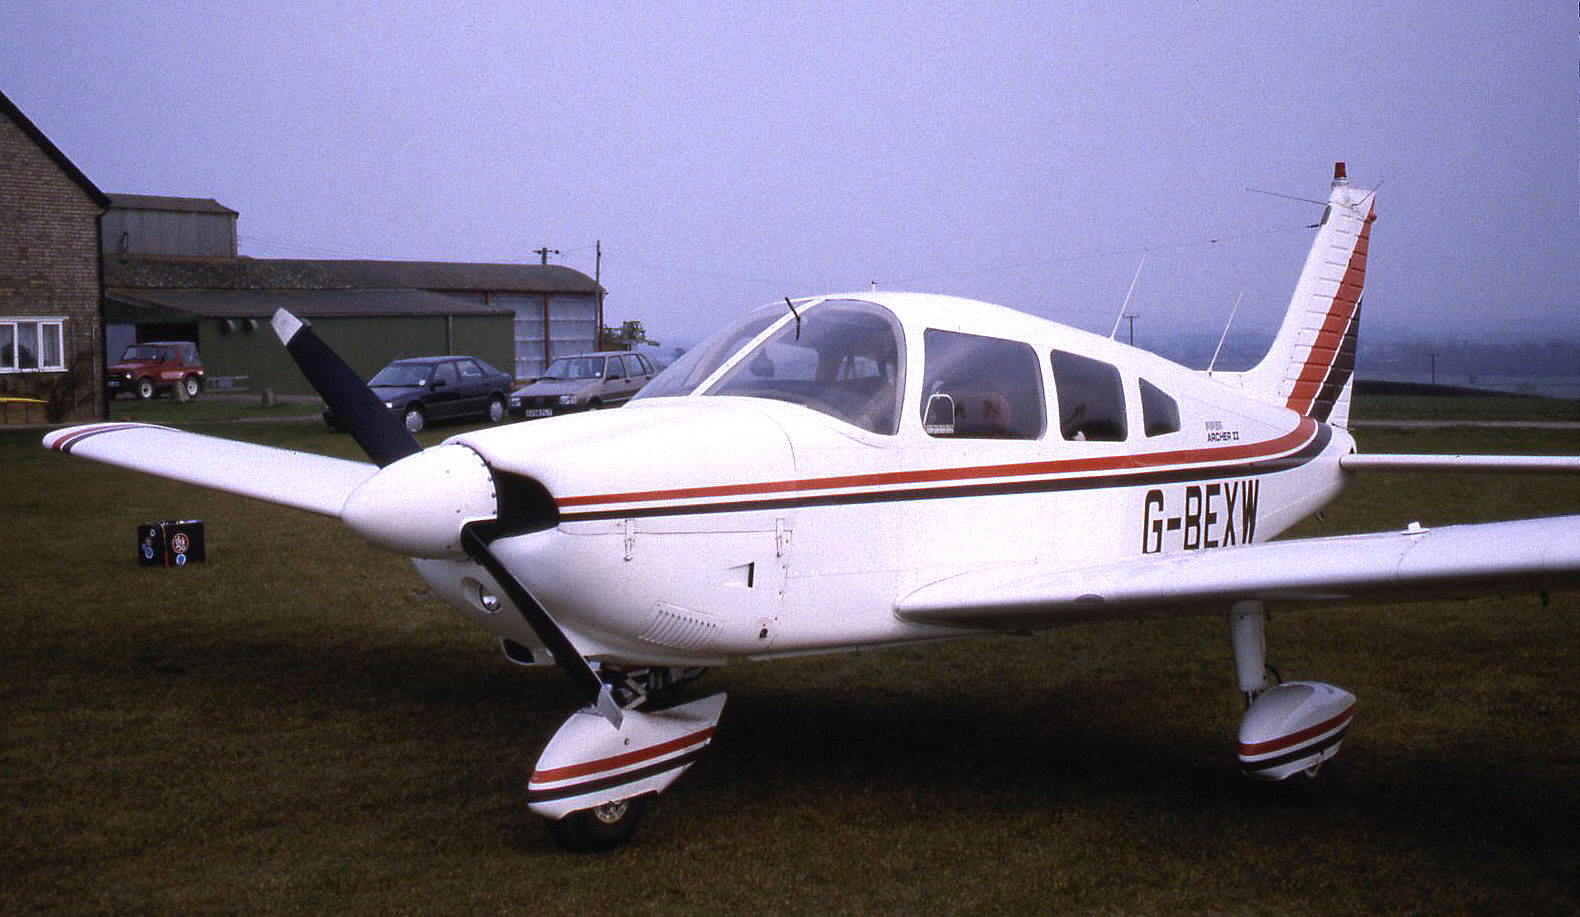 The PA-28 Archer II G-BEXW